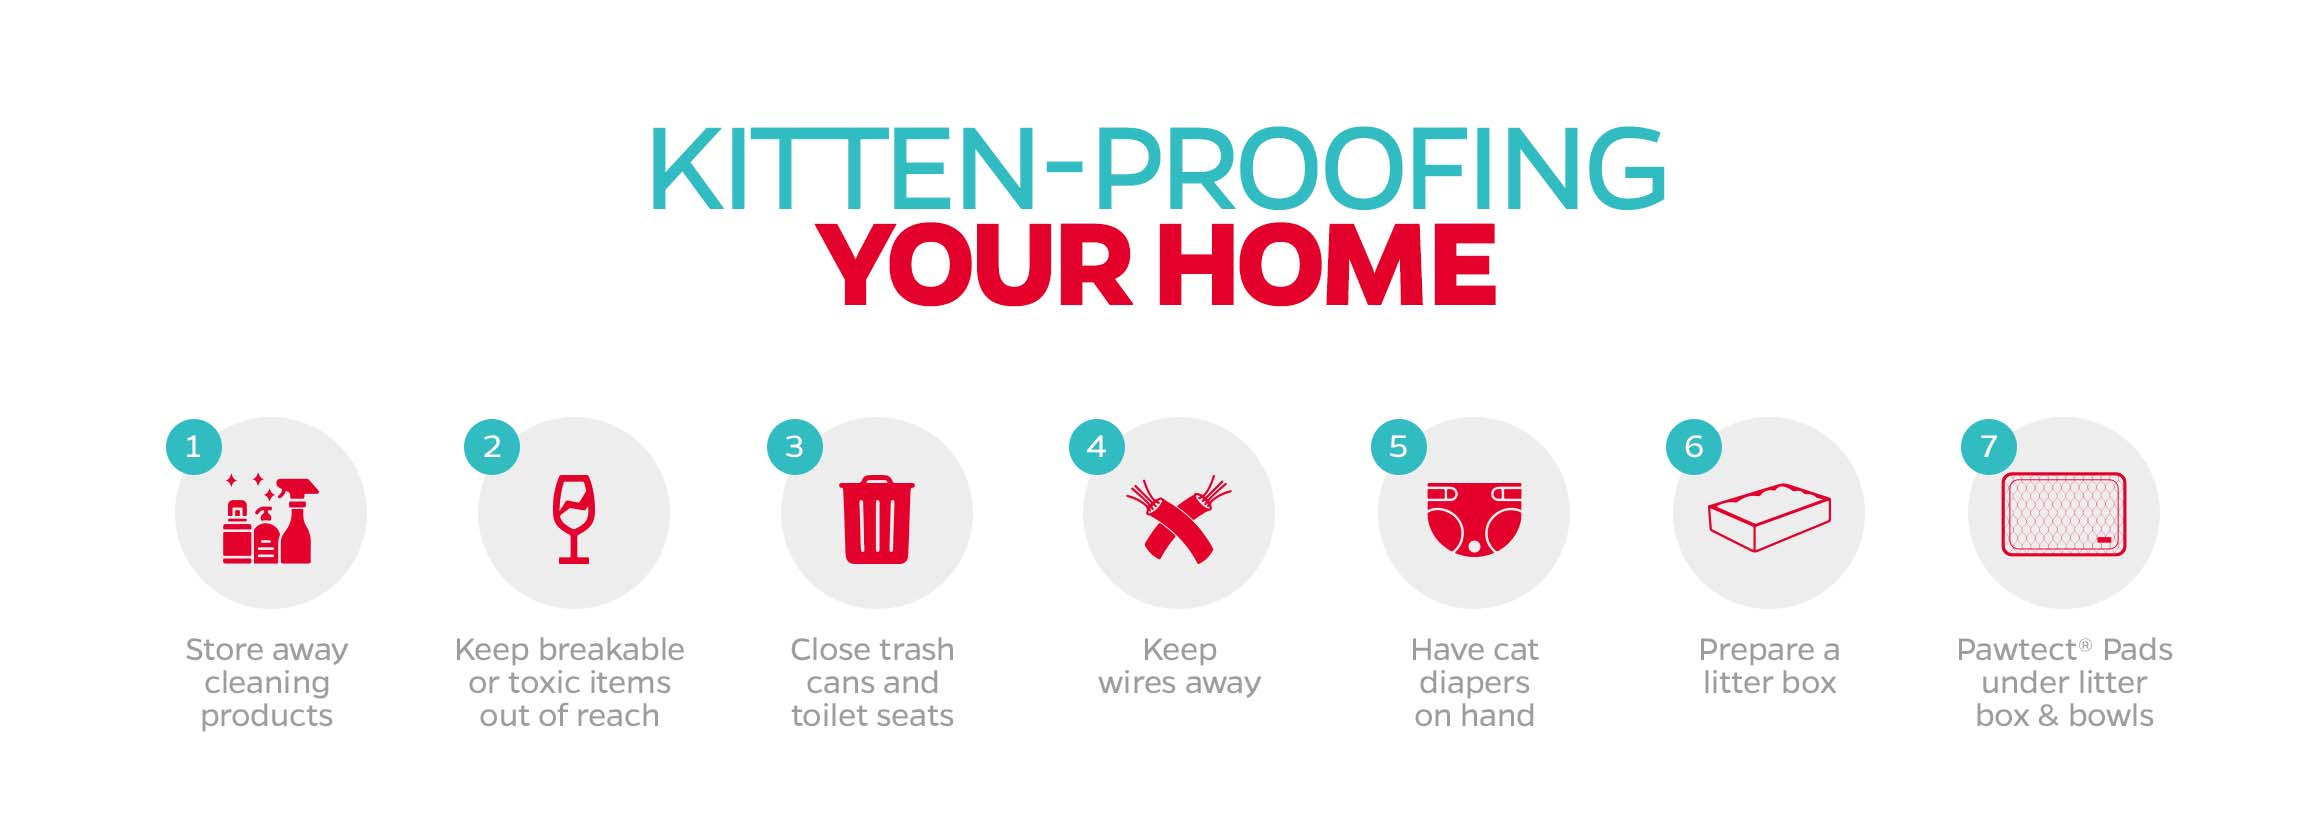 how to kitten proof your home, raising a kitten